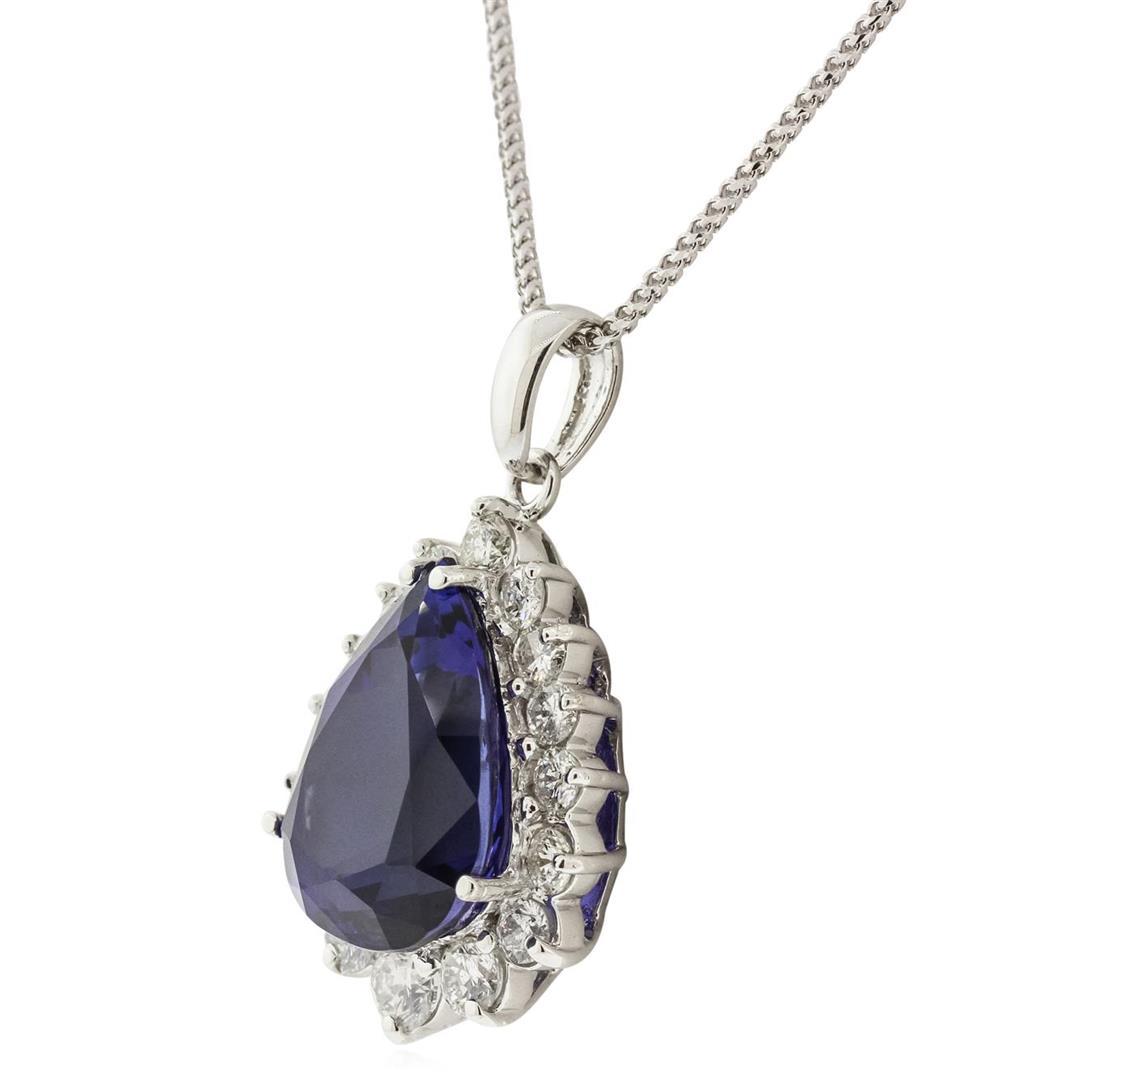 14KT White Gold GIA Certified 23.12 ctw Tanzanite and Diamond Pendant With Chain